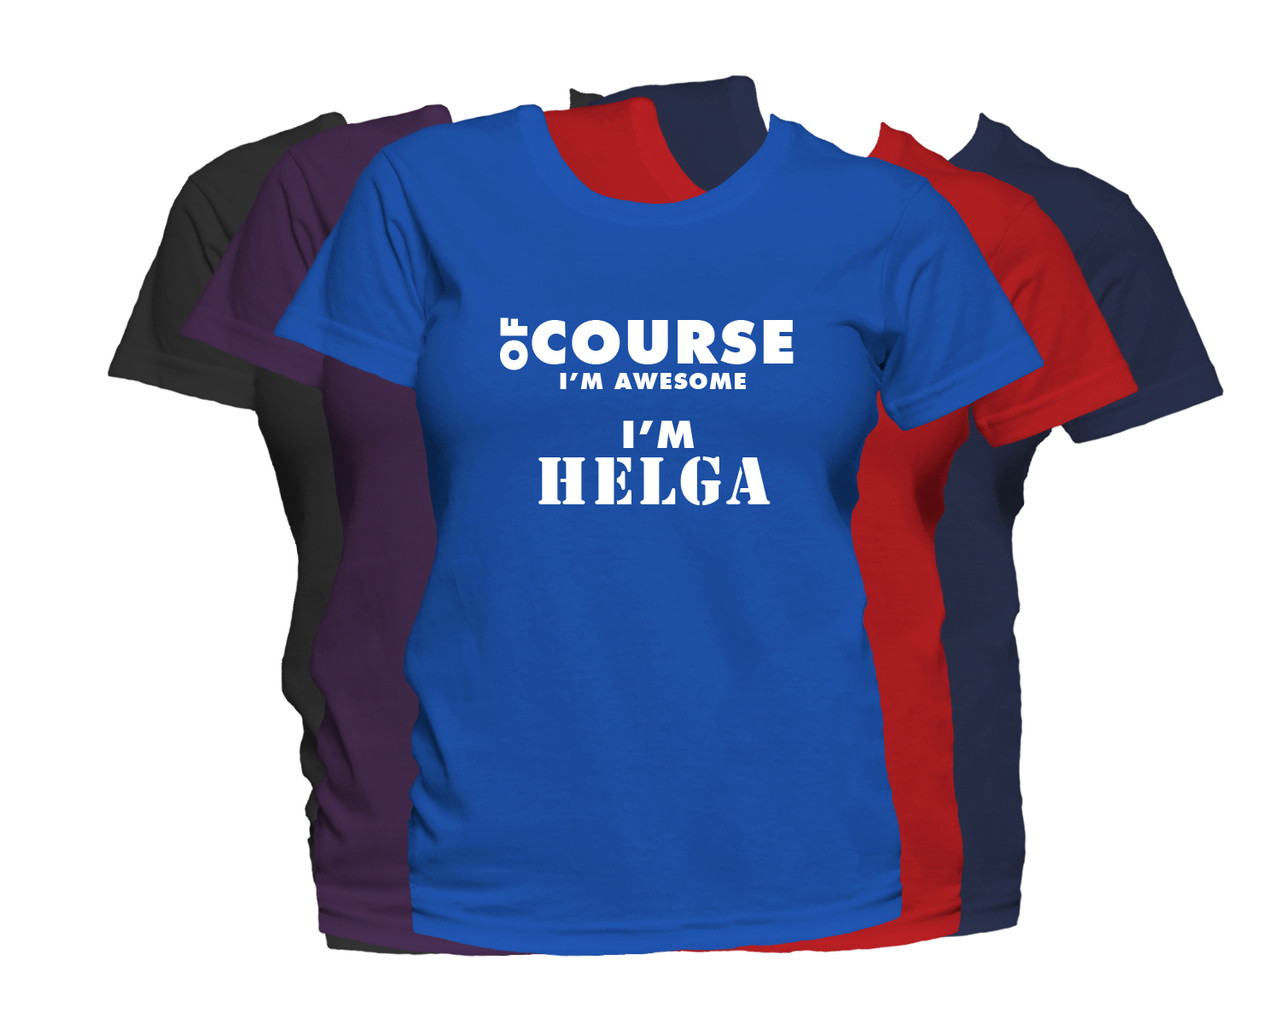 HELGA First Name T Shirt Of Course I'm Awesome Personalized Custom Women's  First Name Shirt - Fat Duck Tees